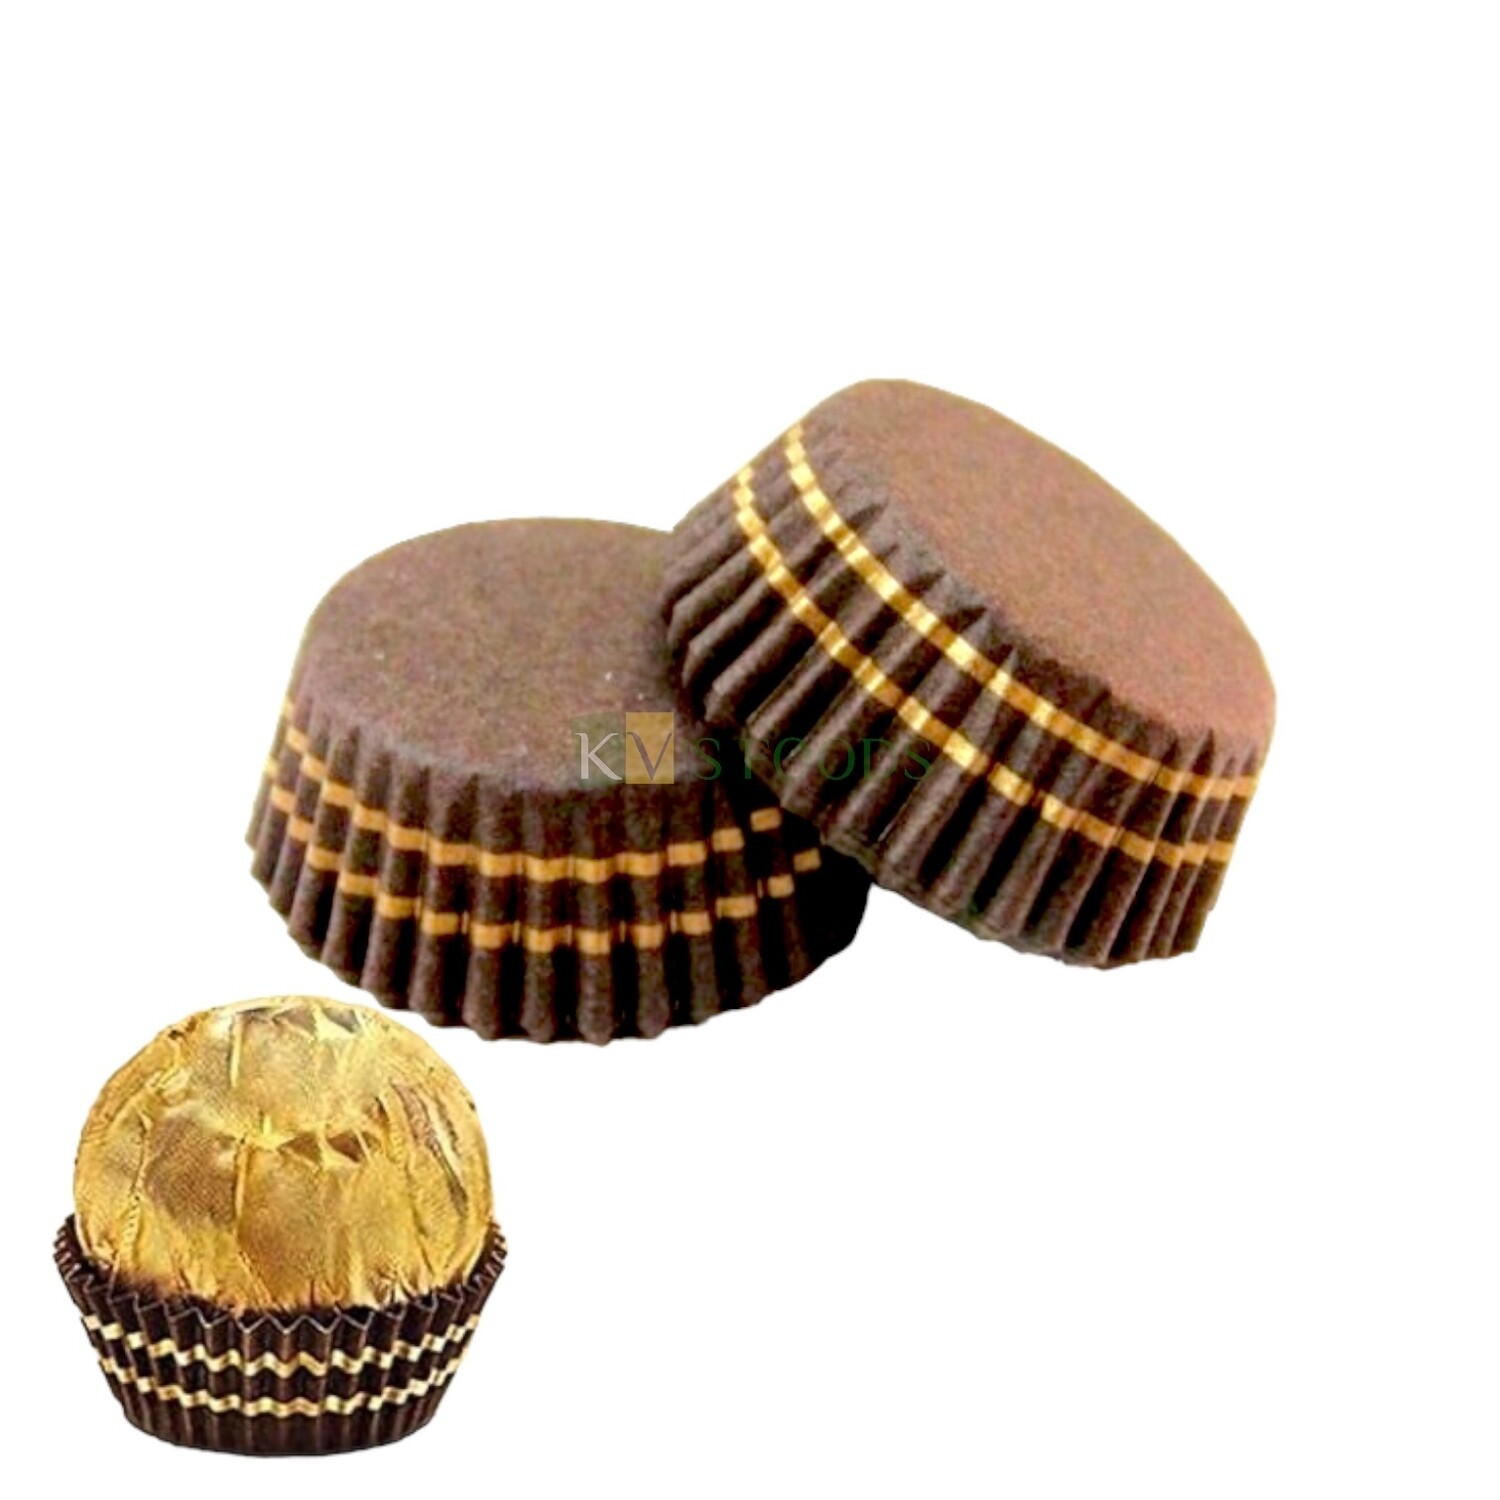 10 PCs Brown Ferrero Rocher Chocolate Liners Paper Cup with golden edge border